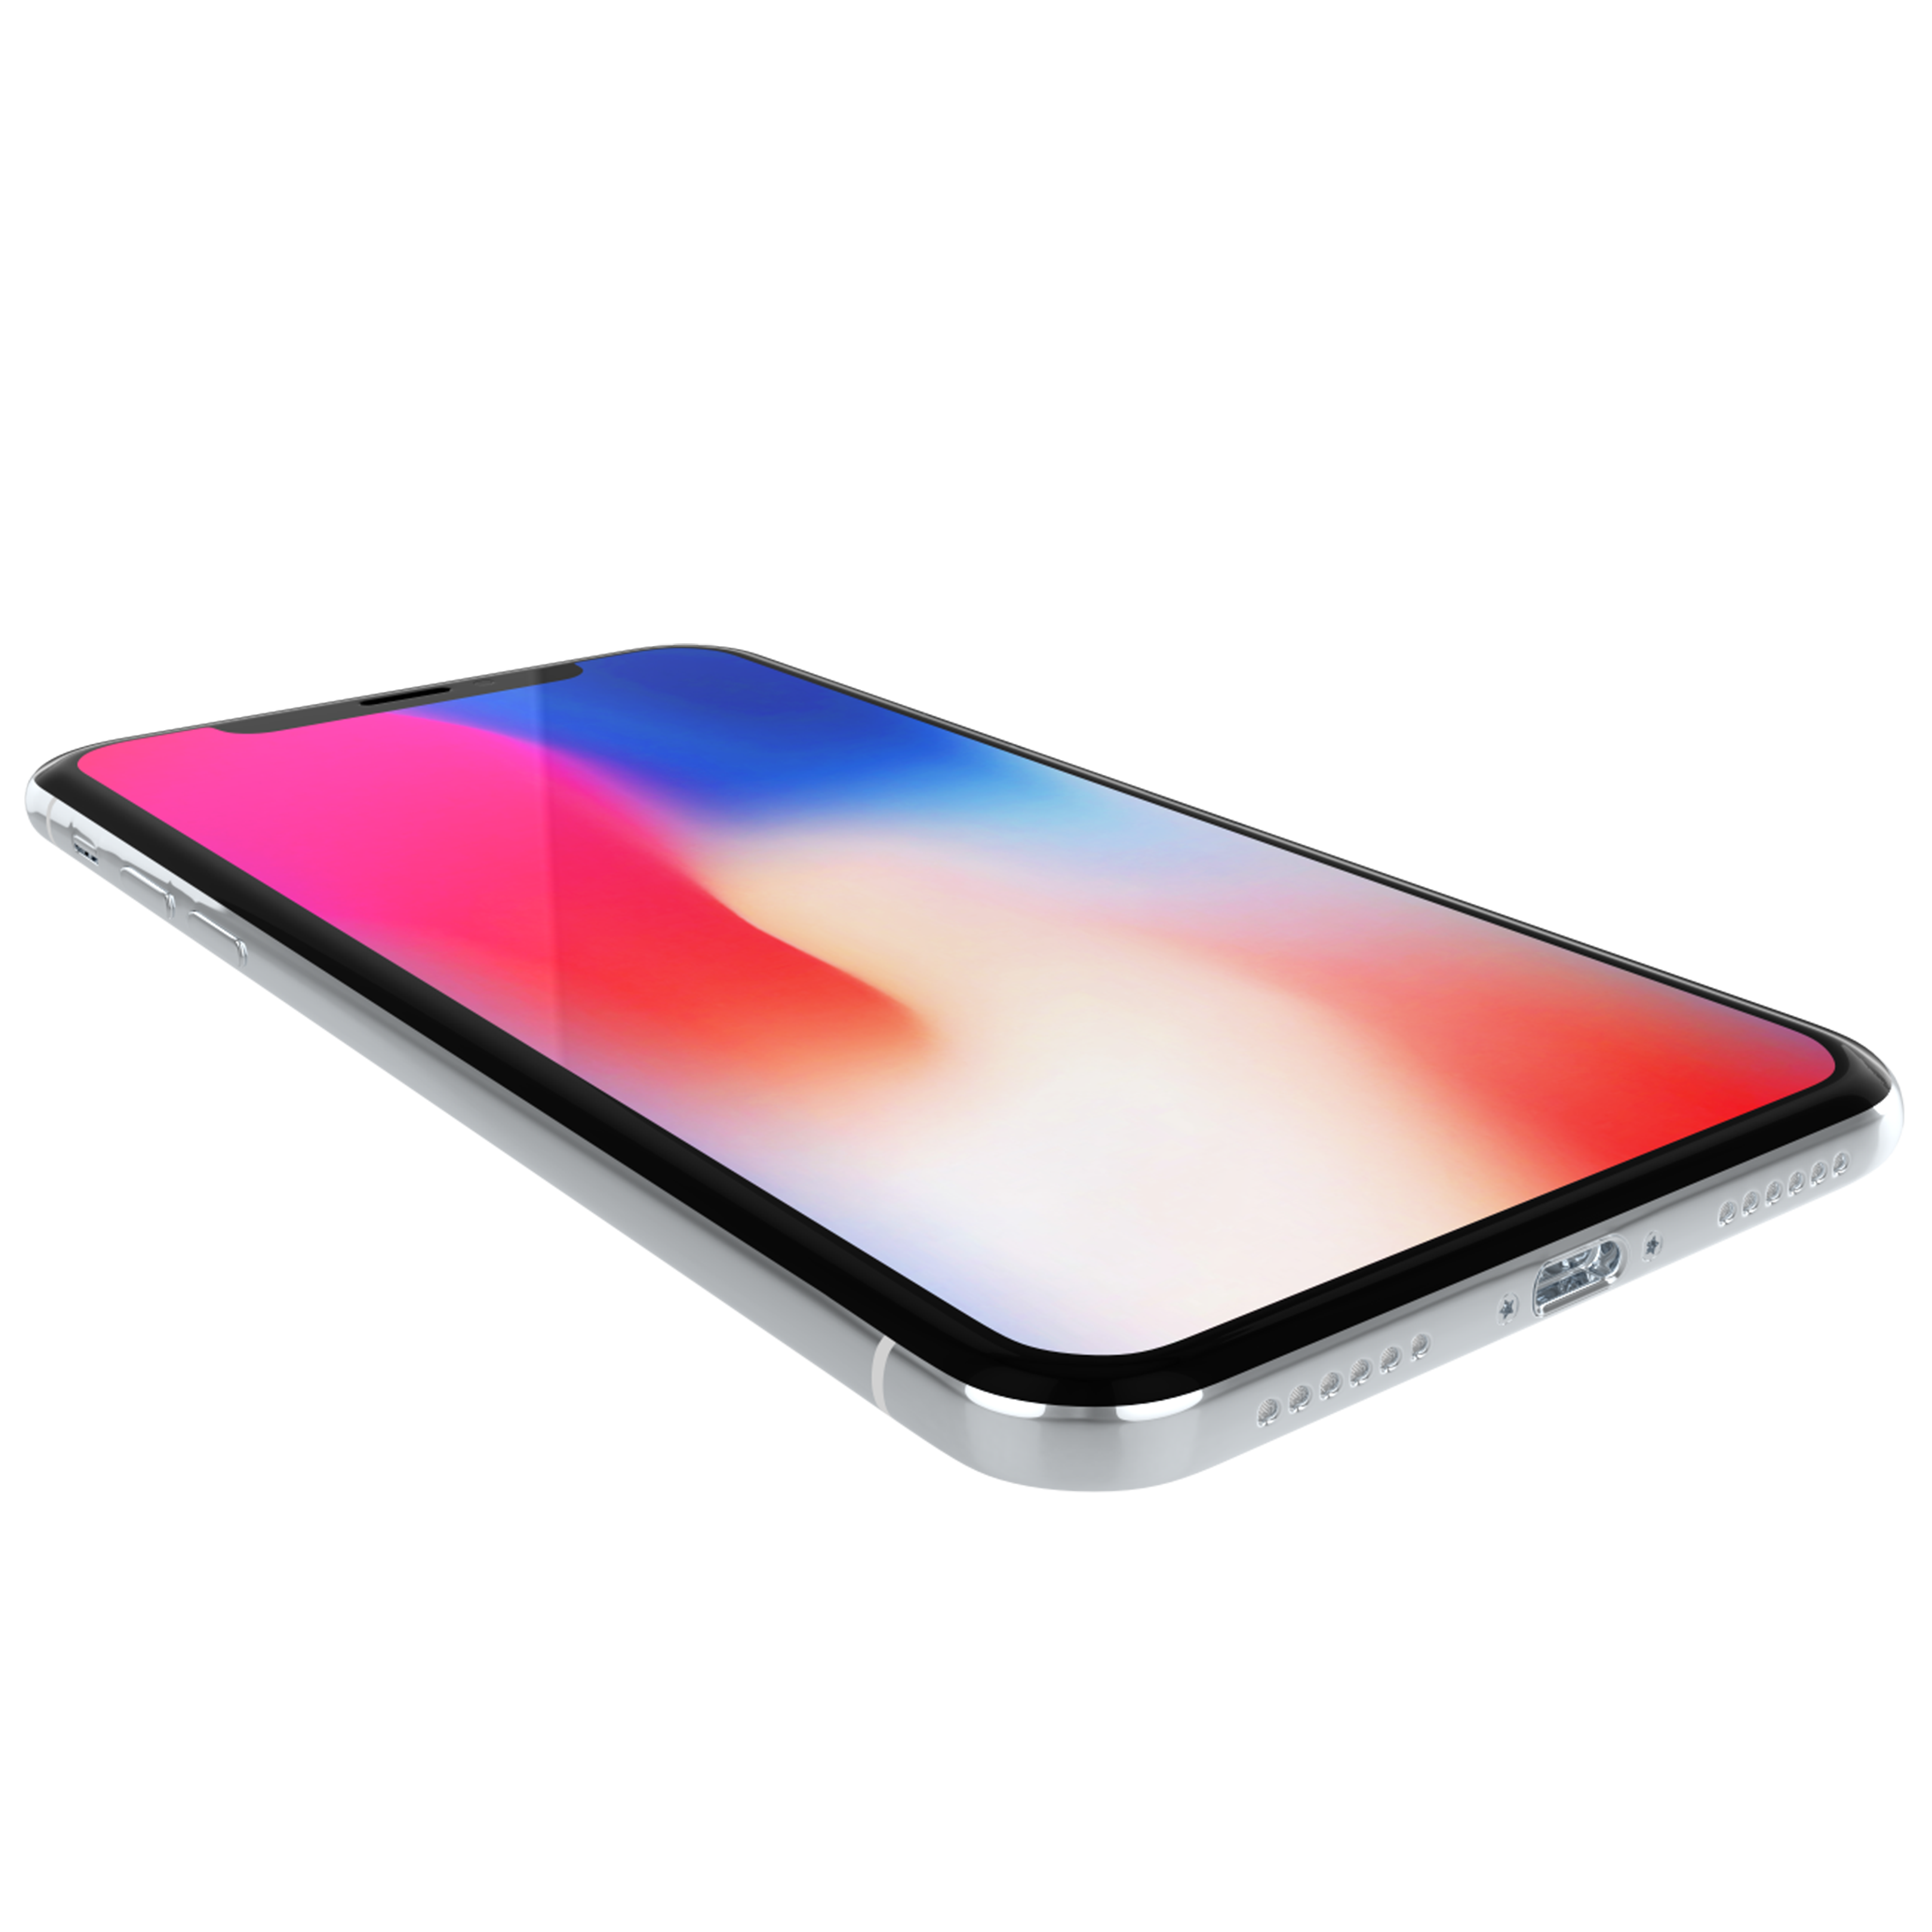 Apple iPhone X PNG Image